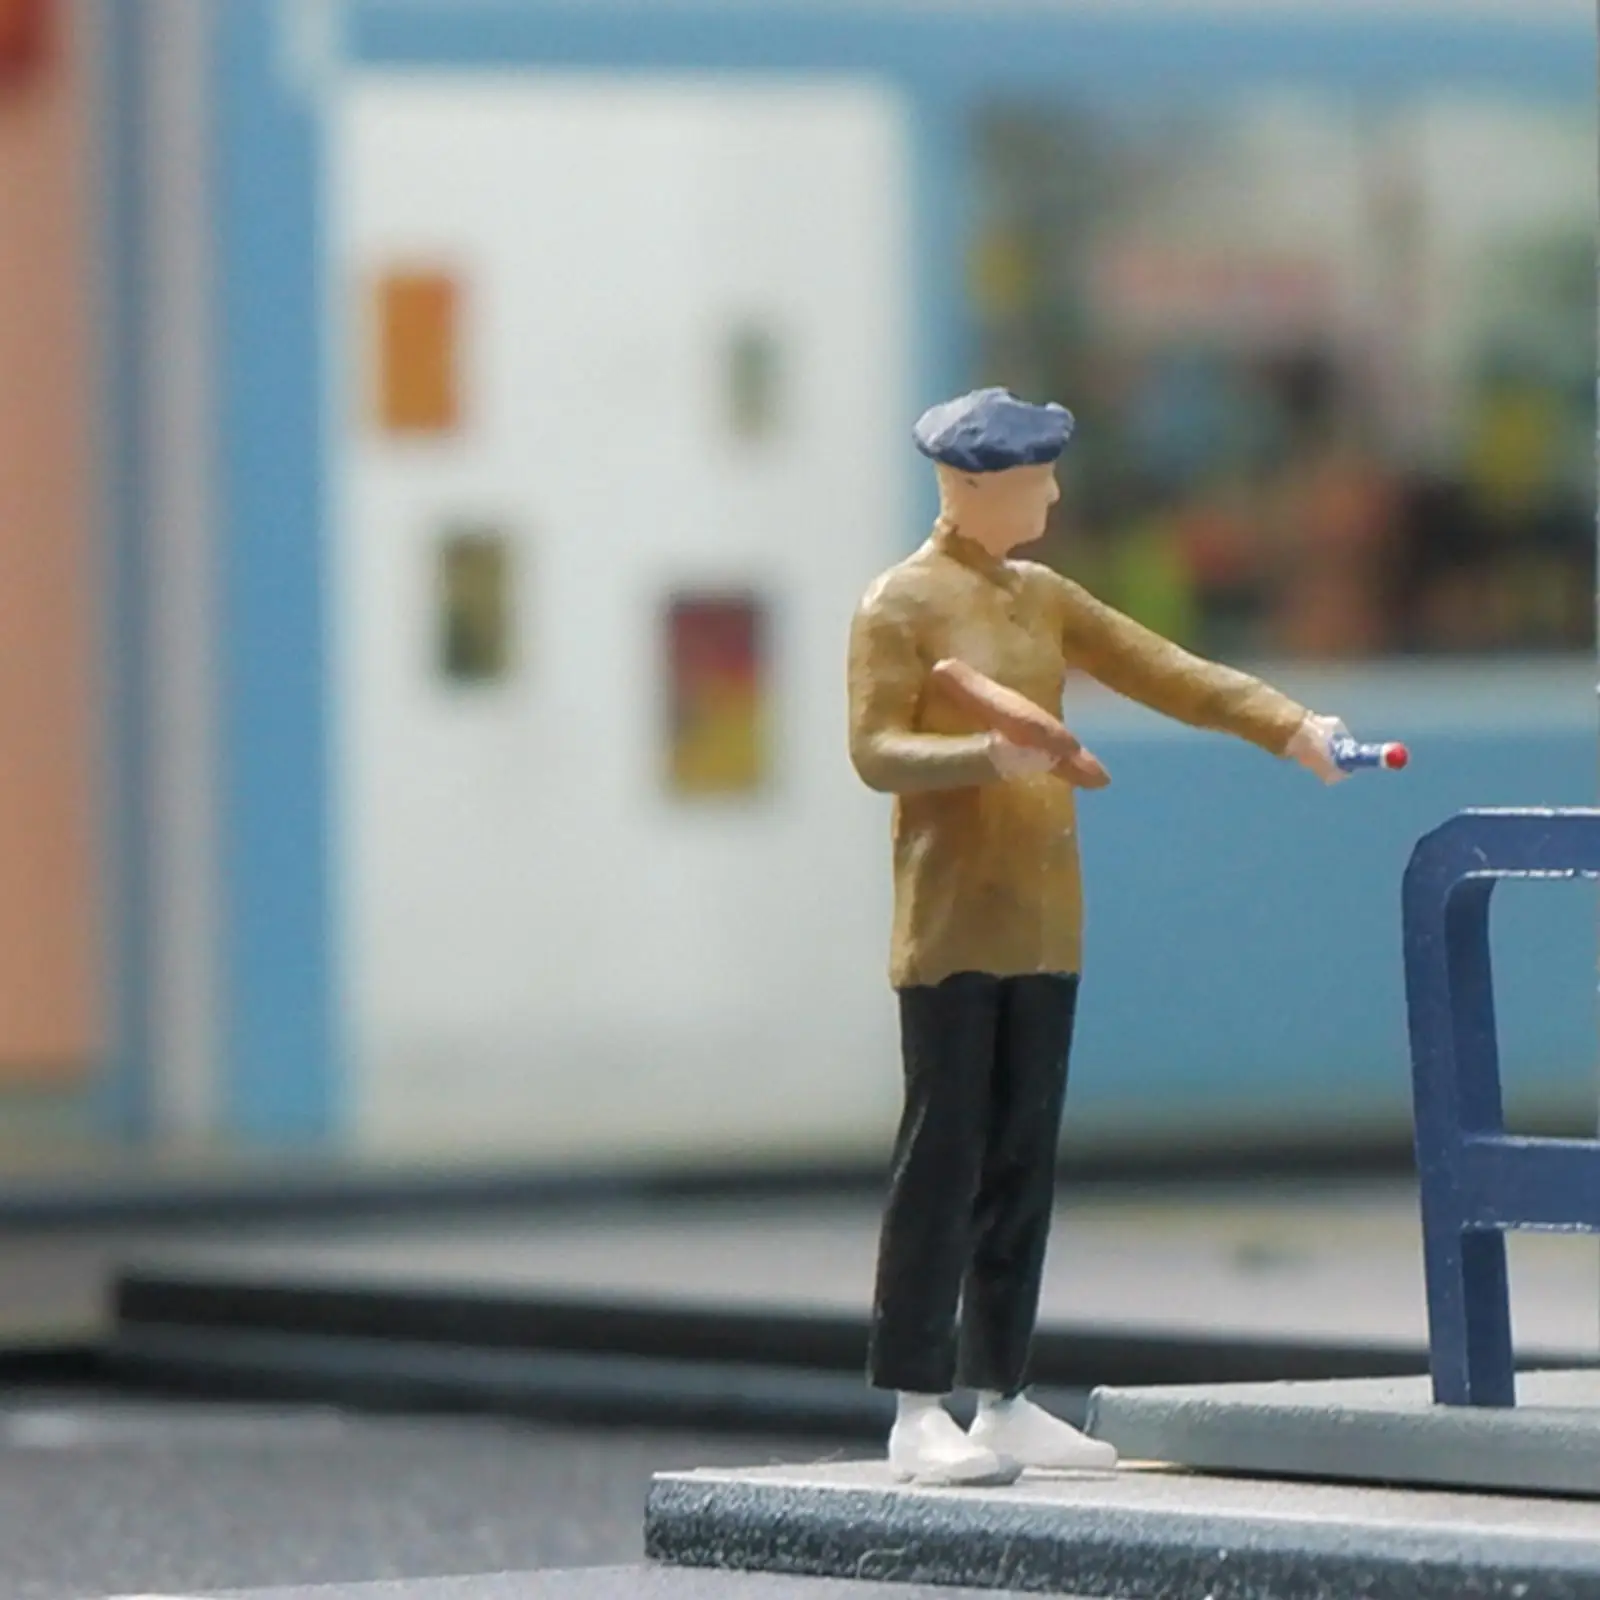 Painted Figures Role Play Figure Standing 1:64 Painter Figure for Train Station Layout Architectural Building Diorama DIY Scene